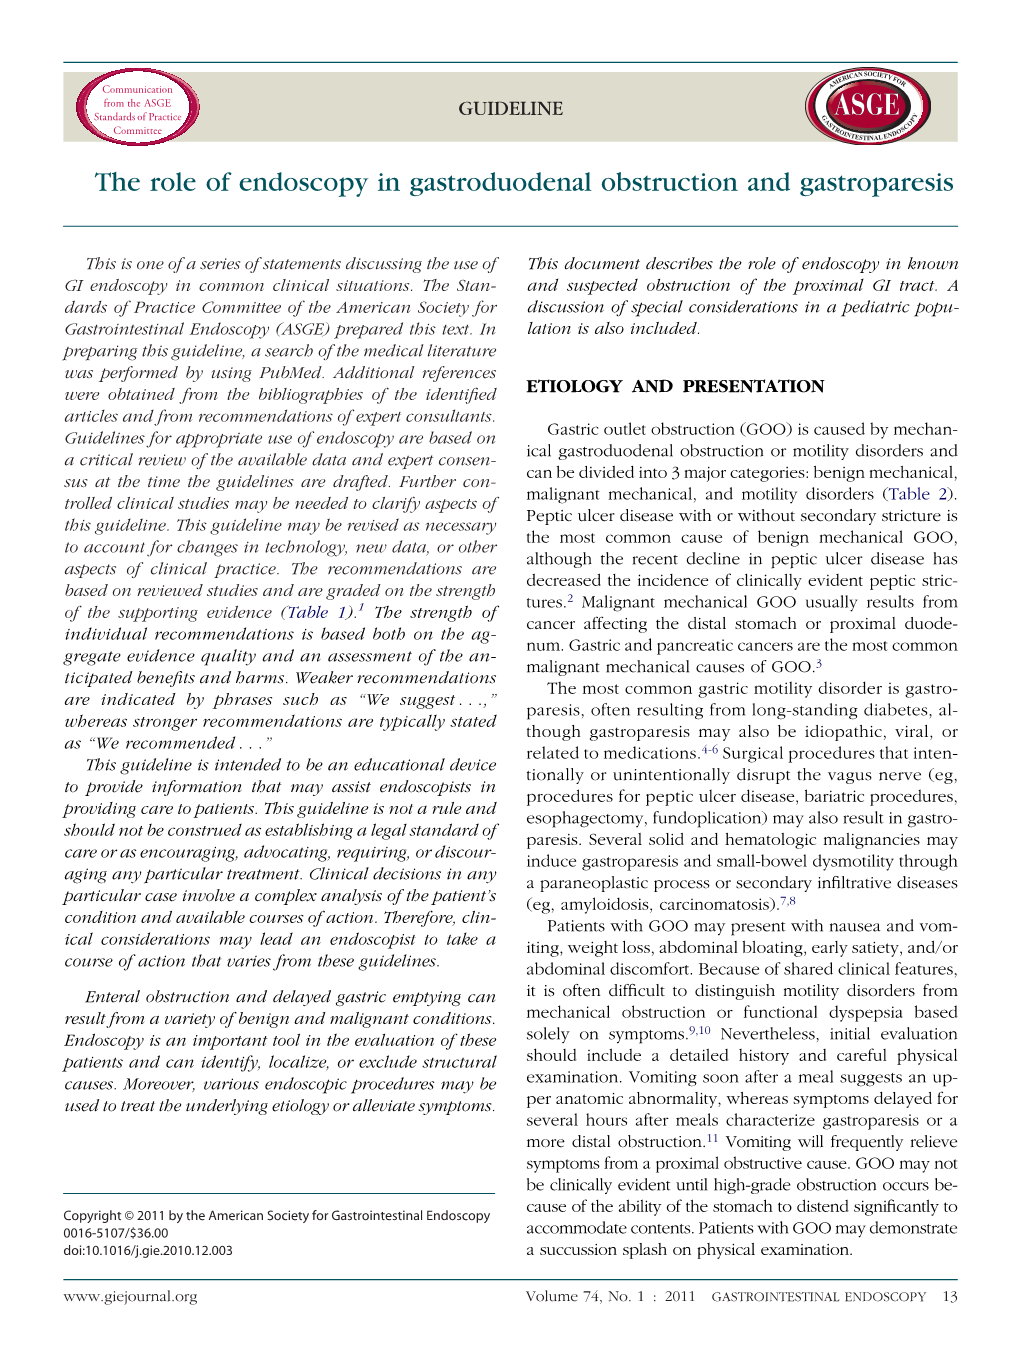 The Role of Endoscopy in Gastroduodenal Obstruction and Gastroparesis